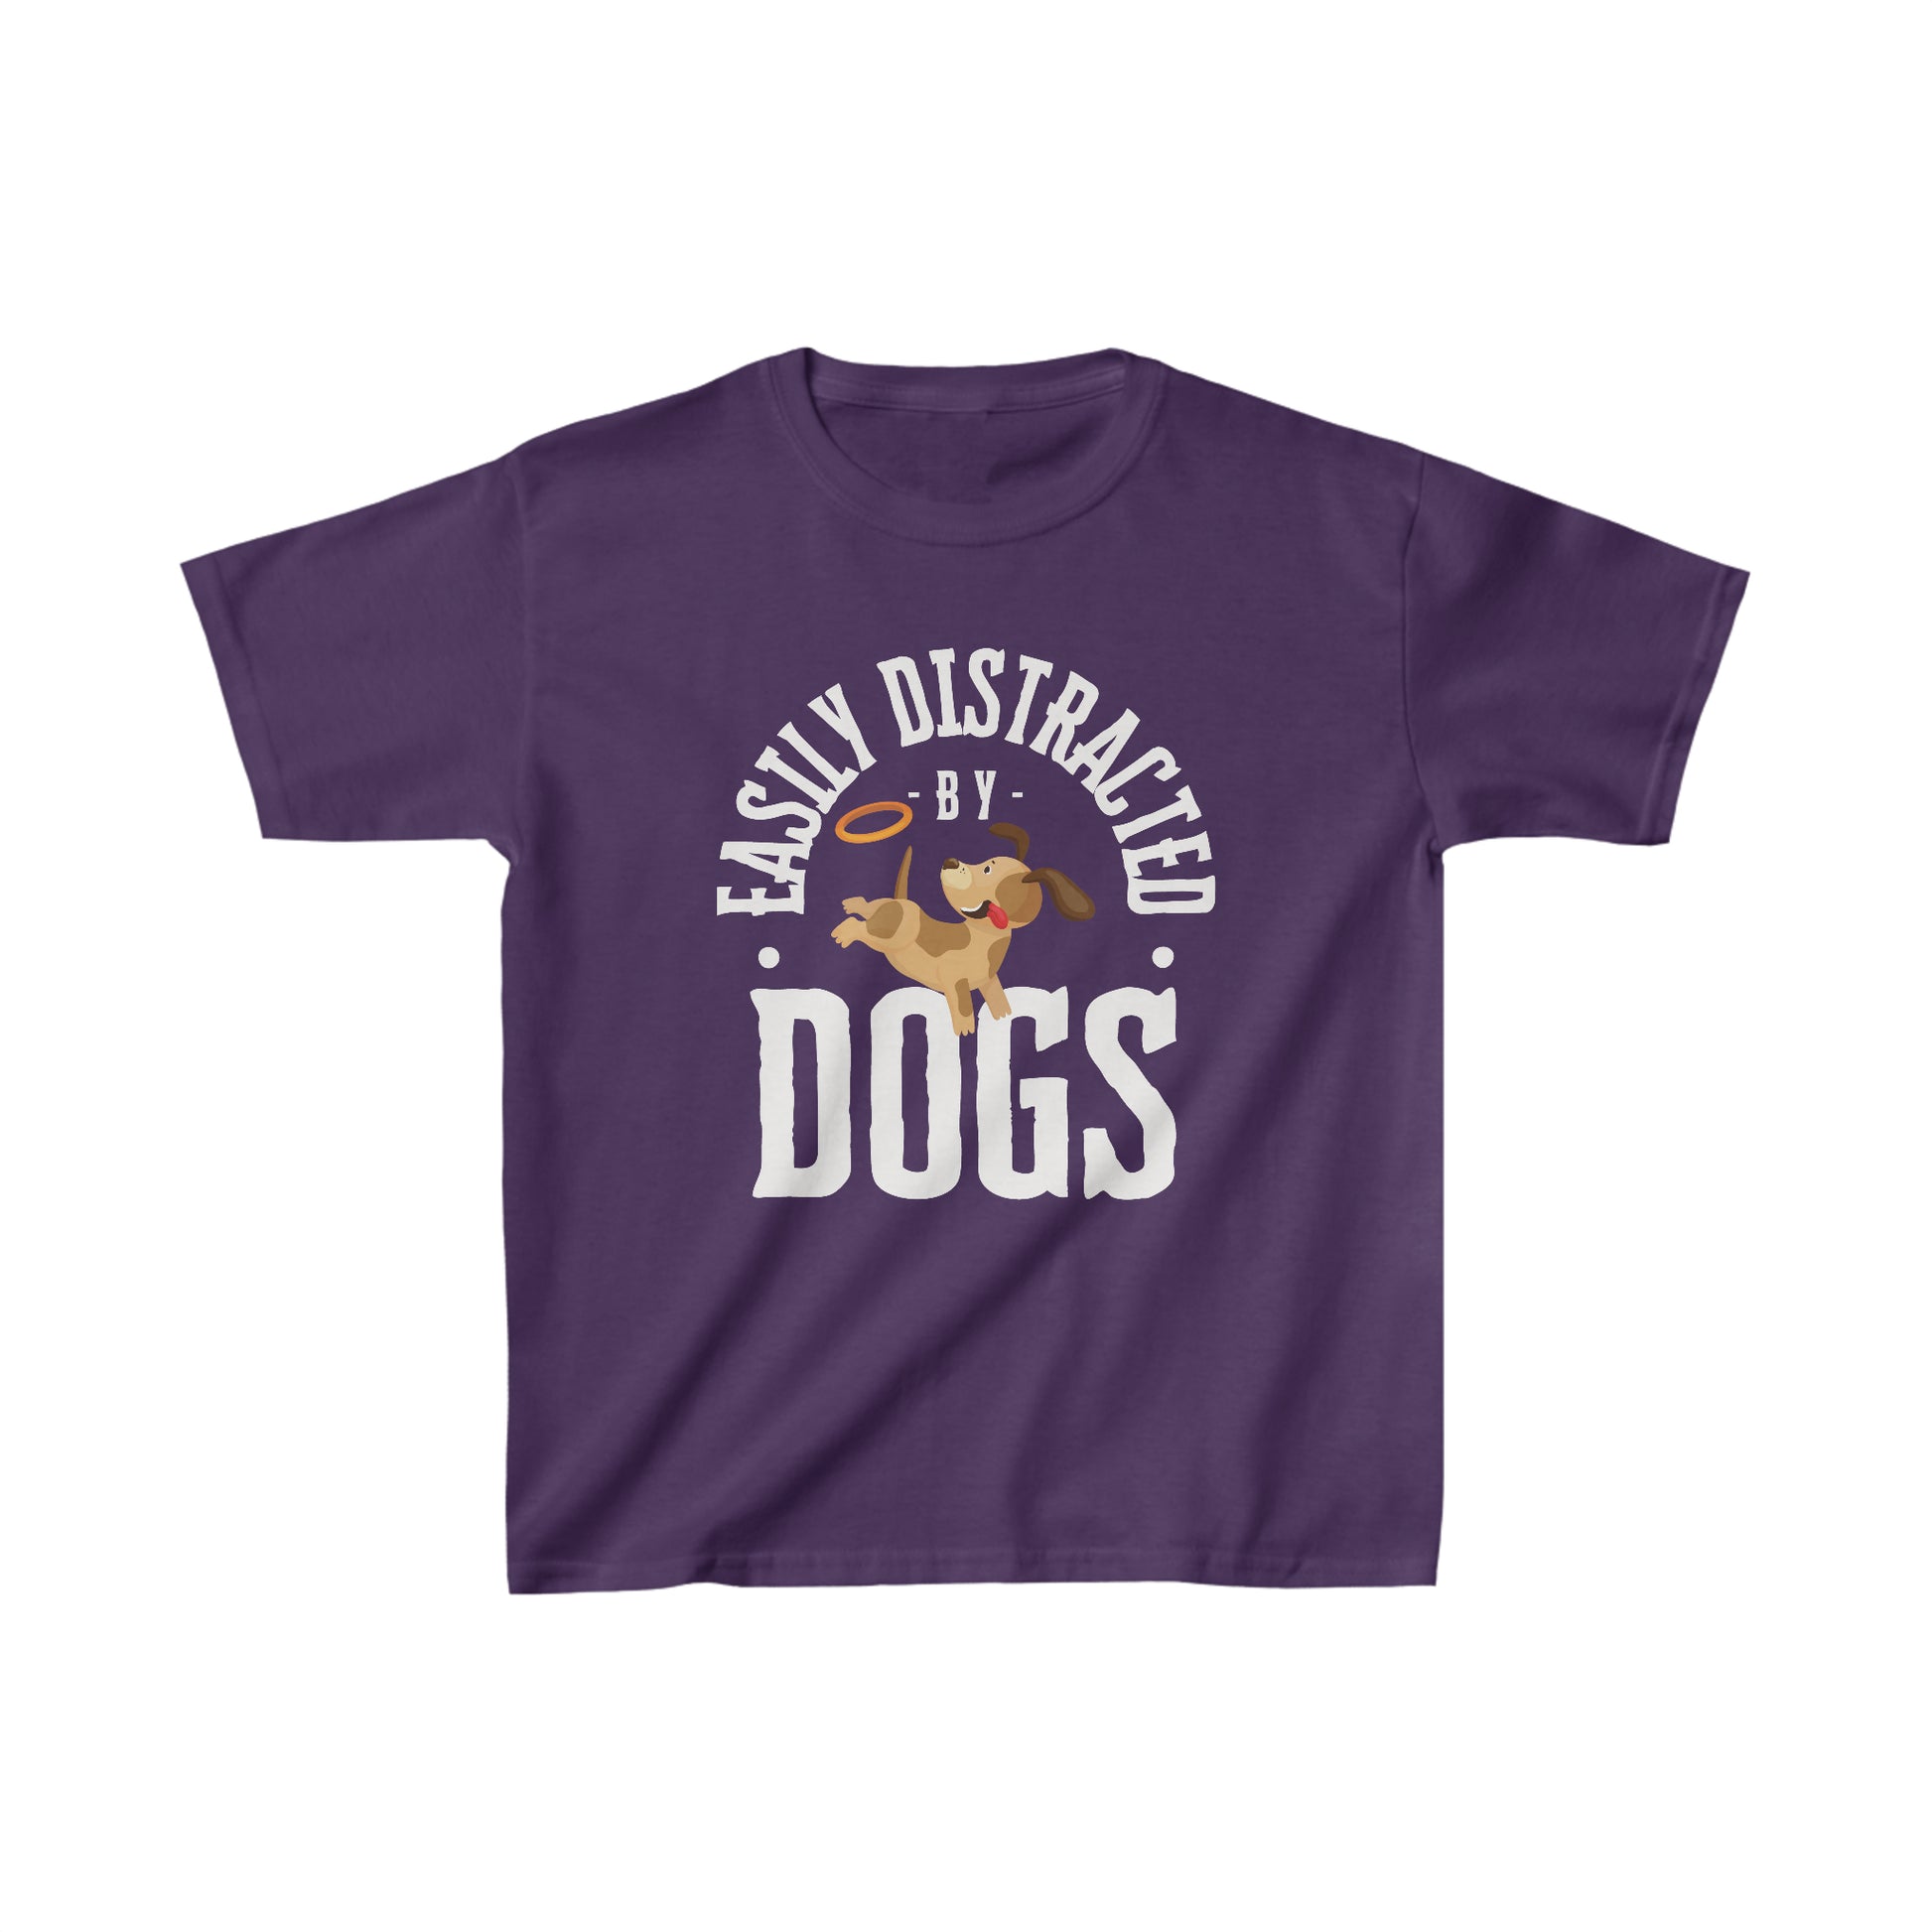 On a white canvas, a Dogs Pure Love purple unisex kids tee features a cute graphic and fun slogan 'Easily Distracted by Dogs.'